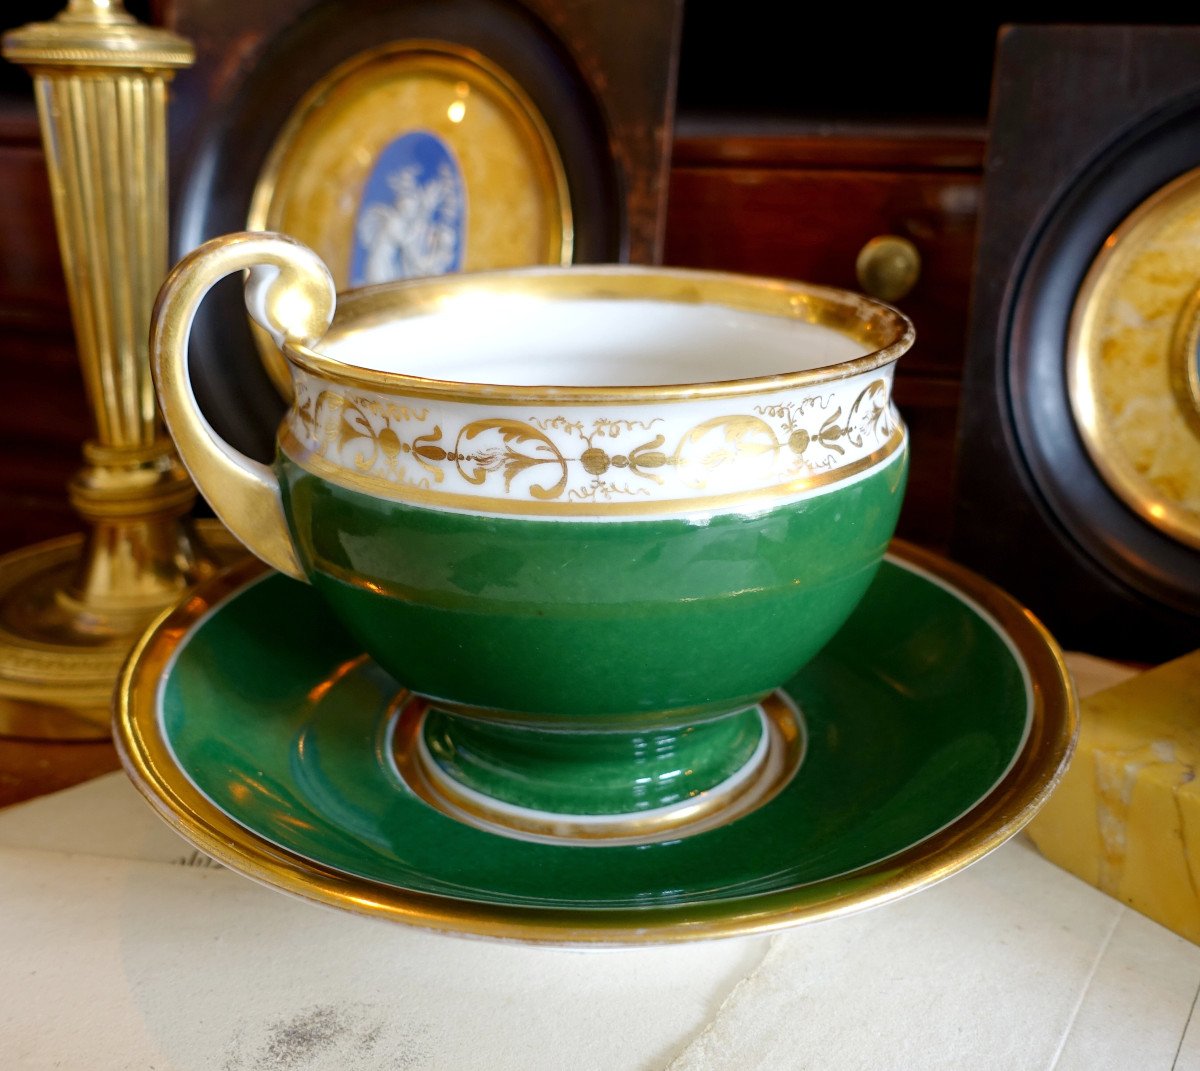 Large Chocolate Cup In Green And Gold Paris Porcelain, Empire Period, Attributed To Nast